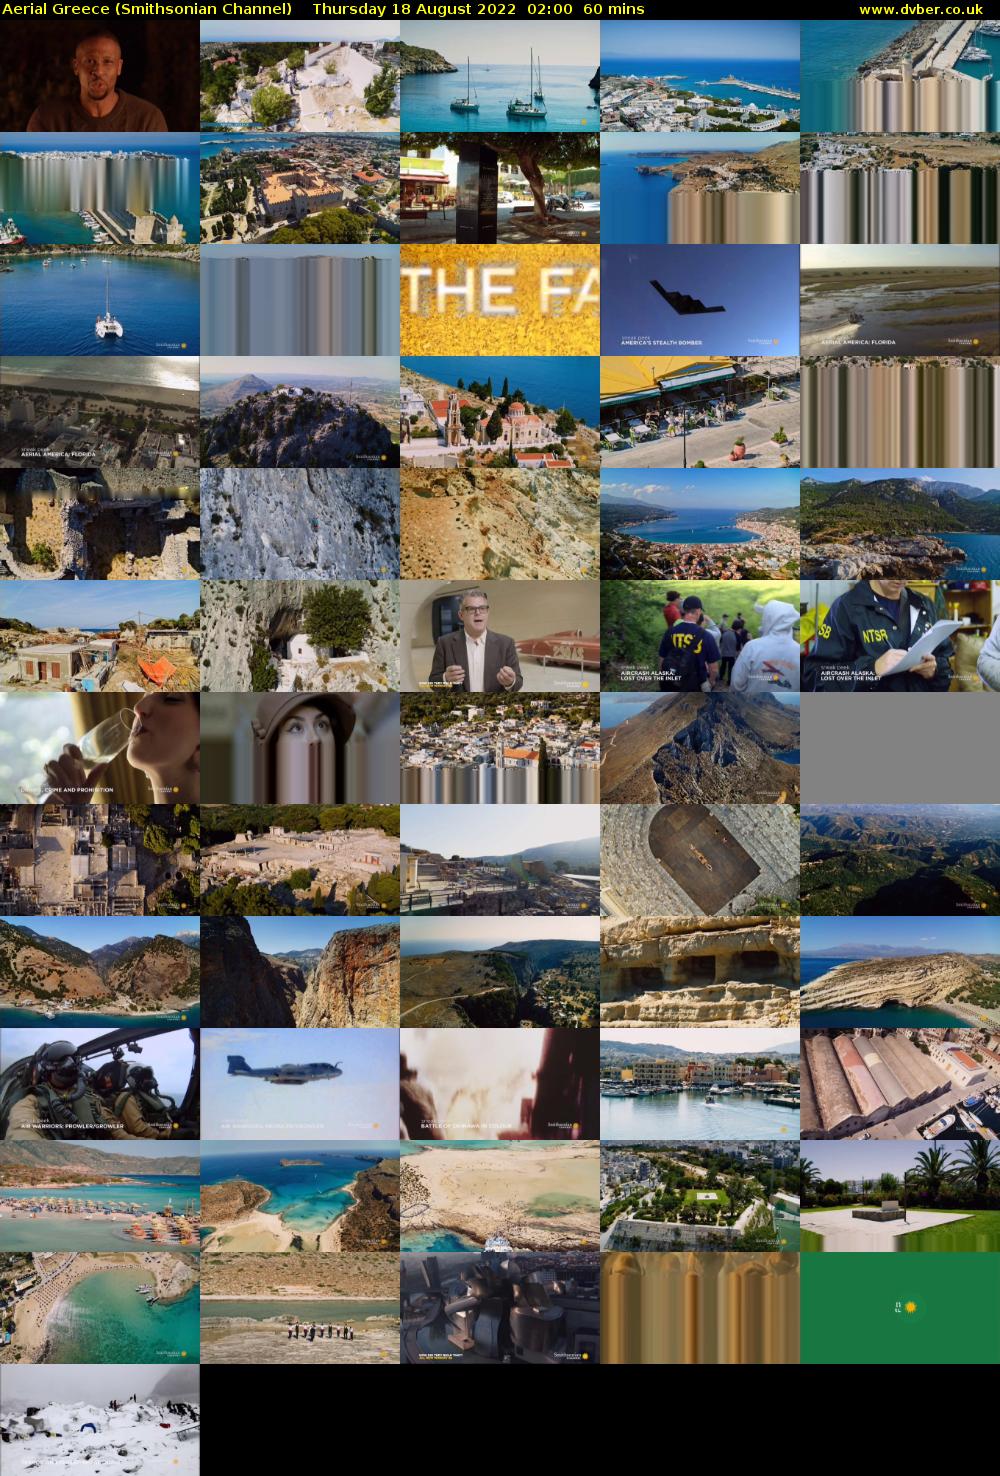 Aerial Greece (Smithsonian Channel) Thursday 18 August 2022 02:00 - 03:00